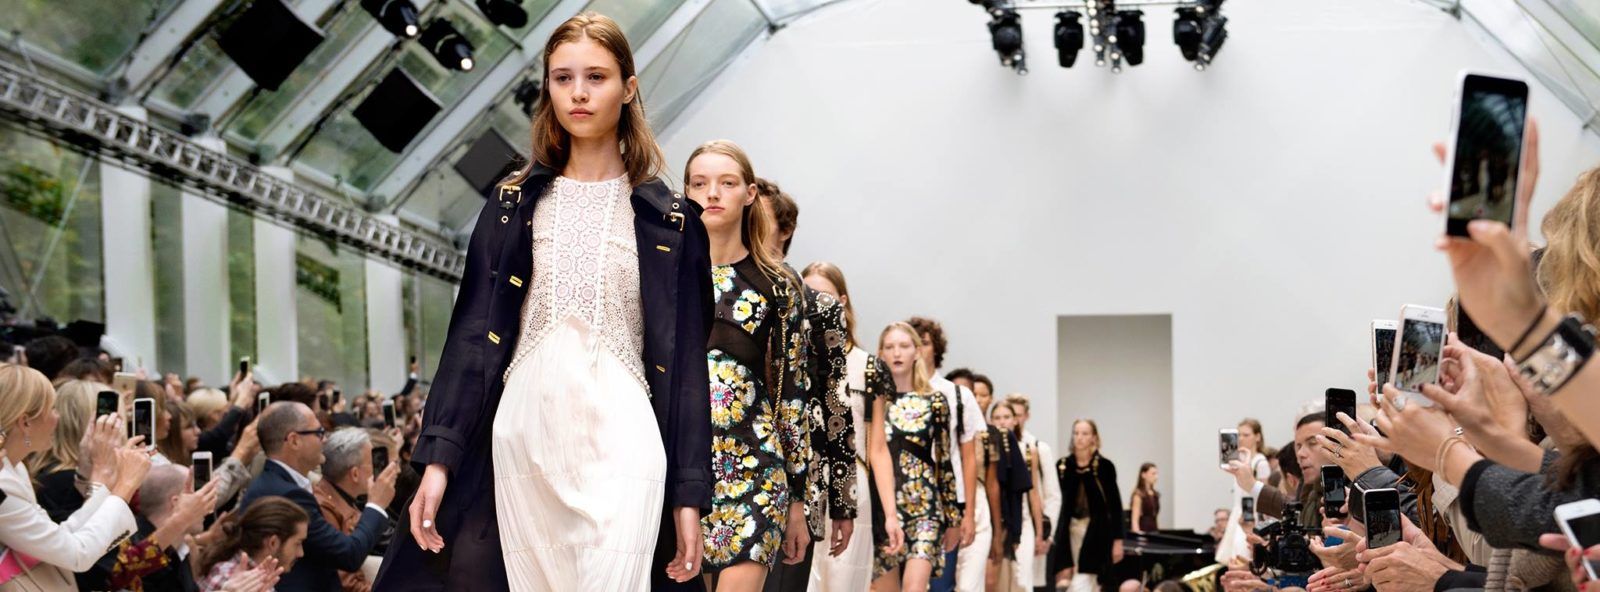 The next Burberry fashion show will be open to everyone